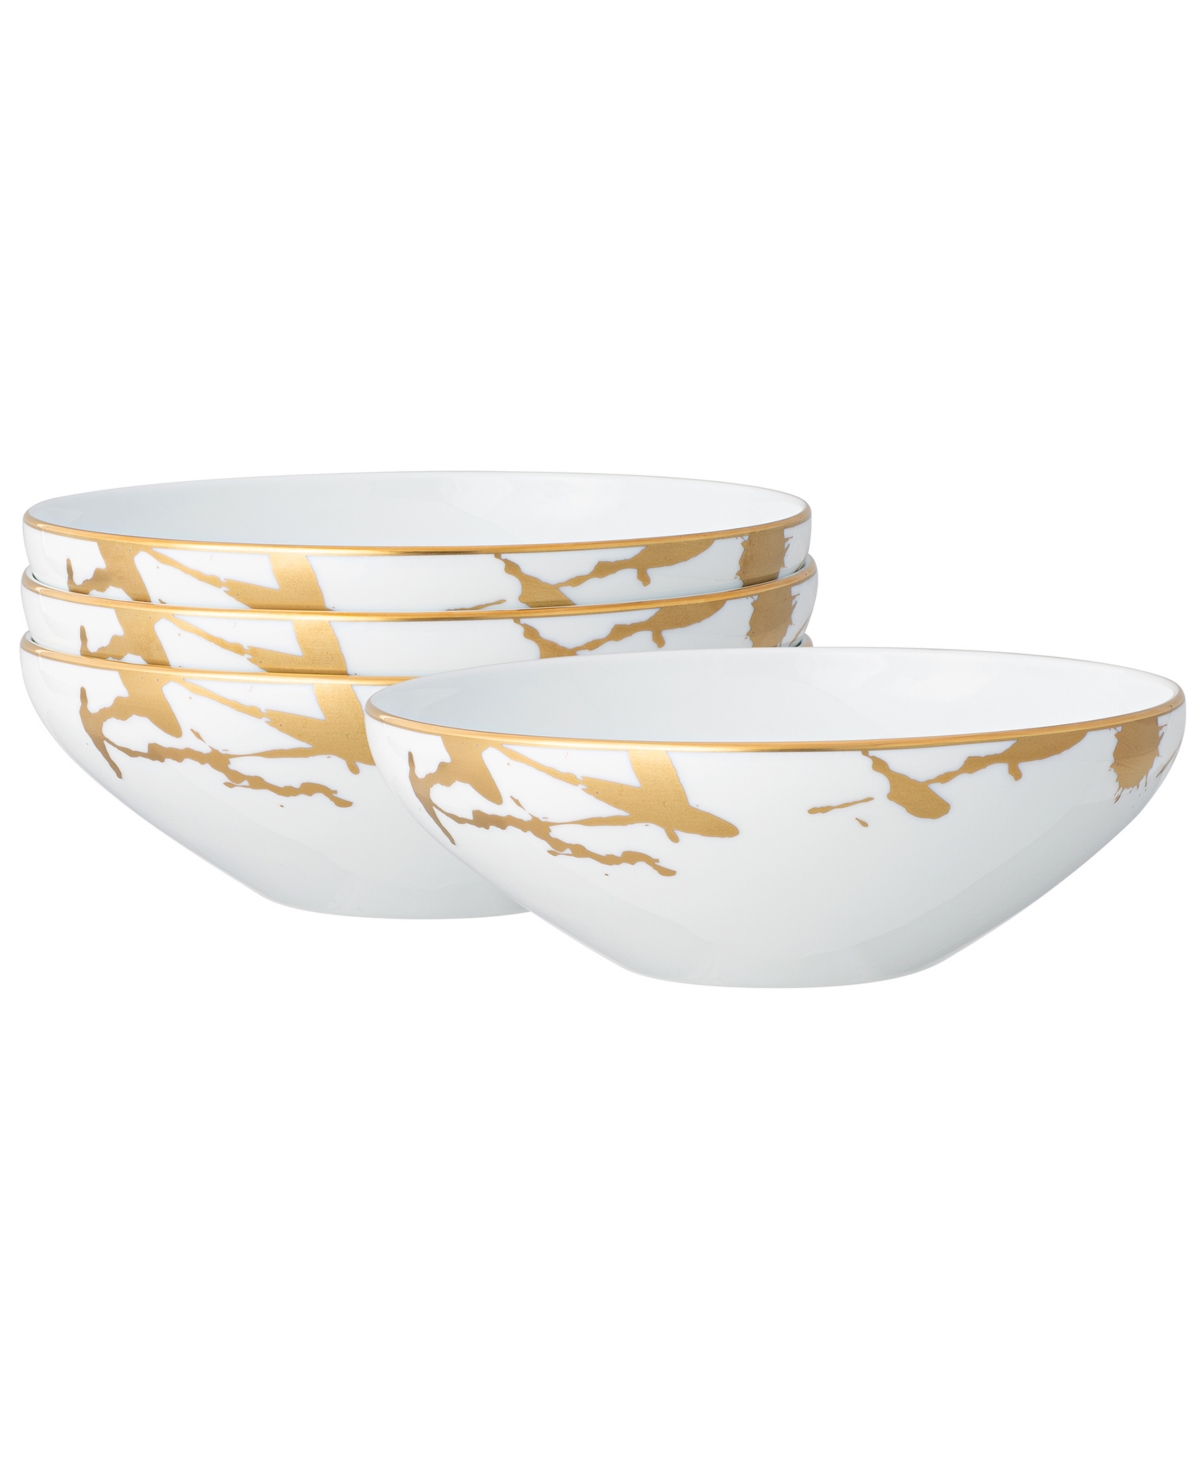 Noritake Raptures Gold Set Of 4 Cereal Bowls, Service For 4 In White Gold-tone